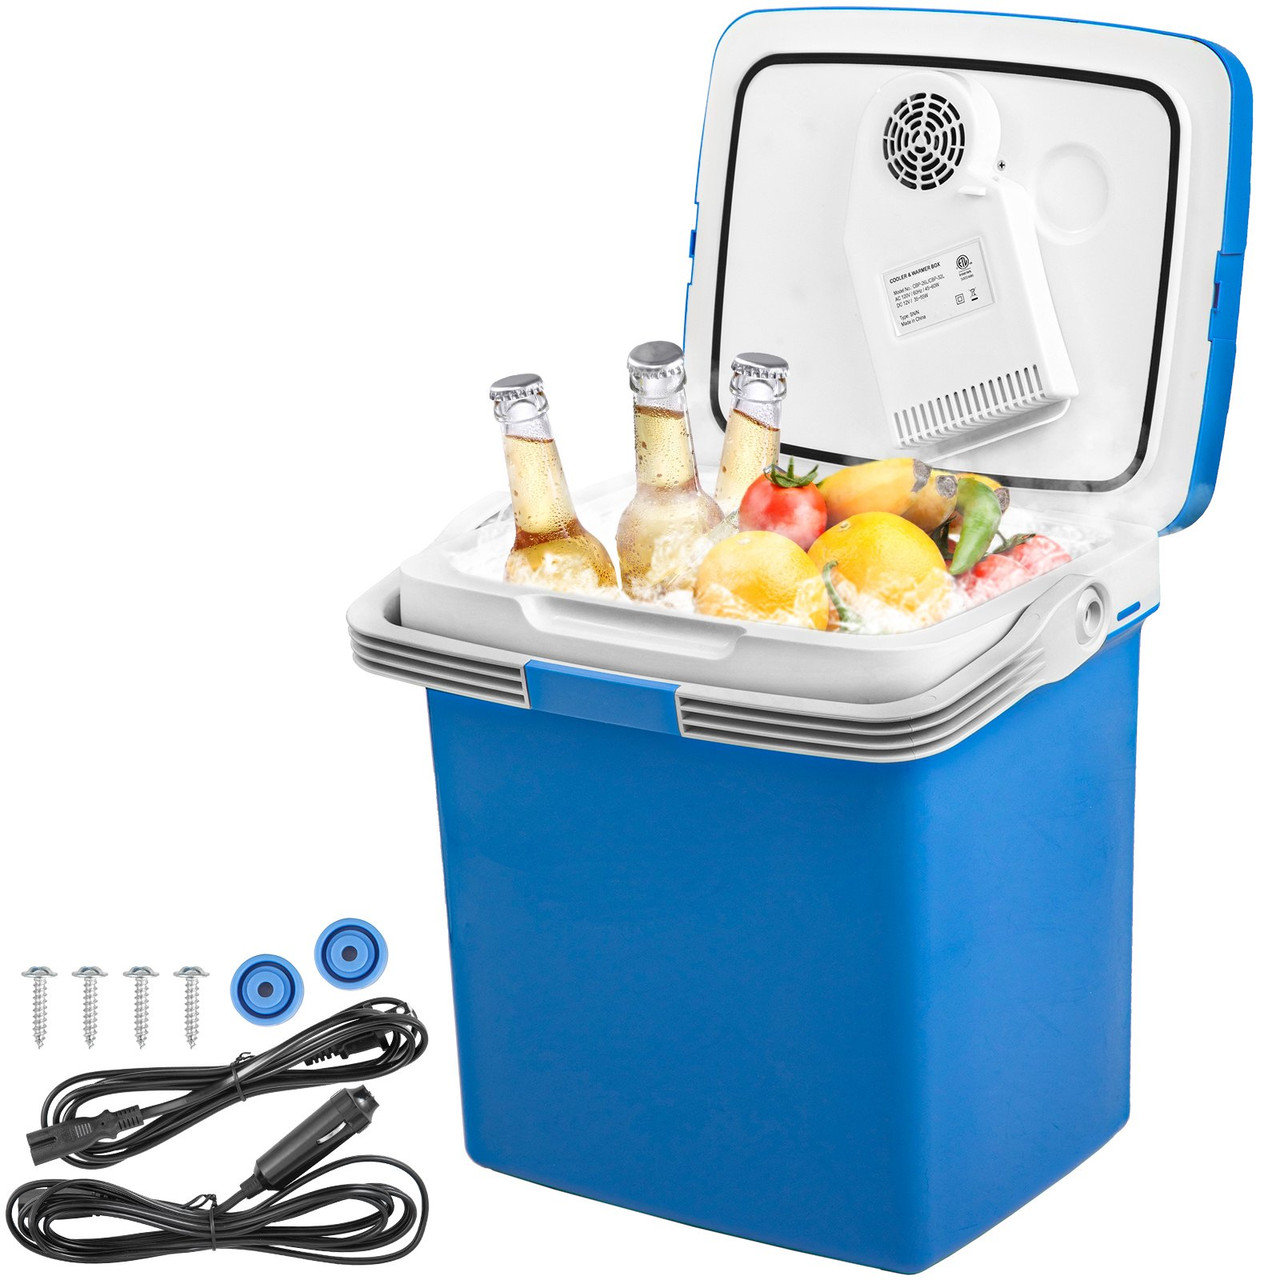 Electric Cooler and Warmer, 28 Quart Portable Thermoelectric Fridge, Plug  in Refrigerator with Collapsible Handle, 110V